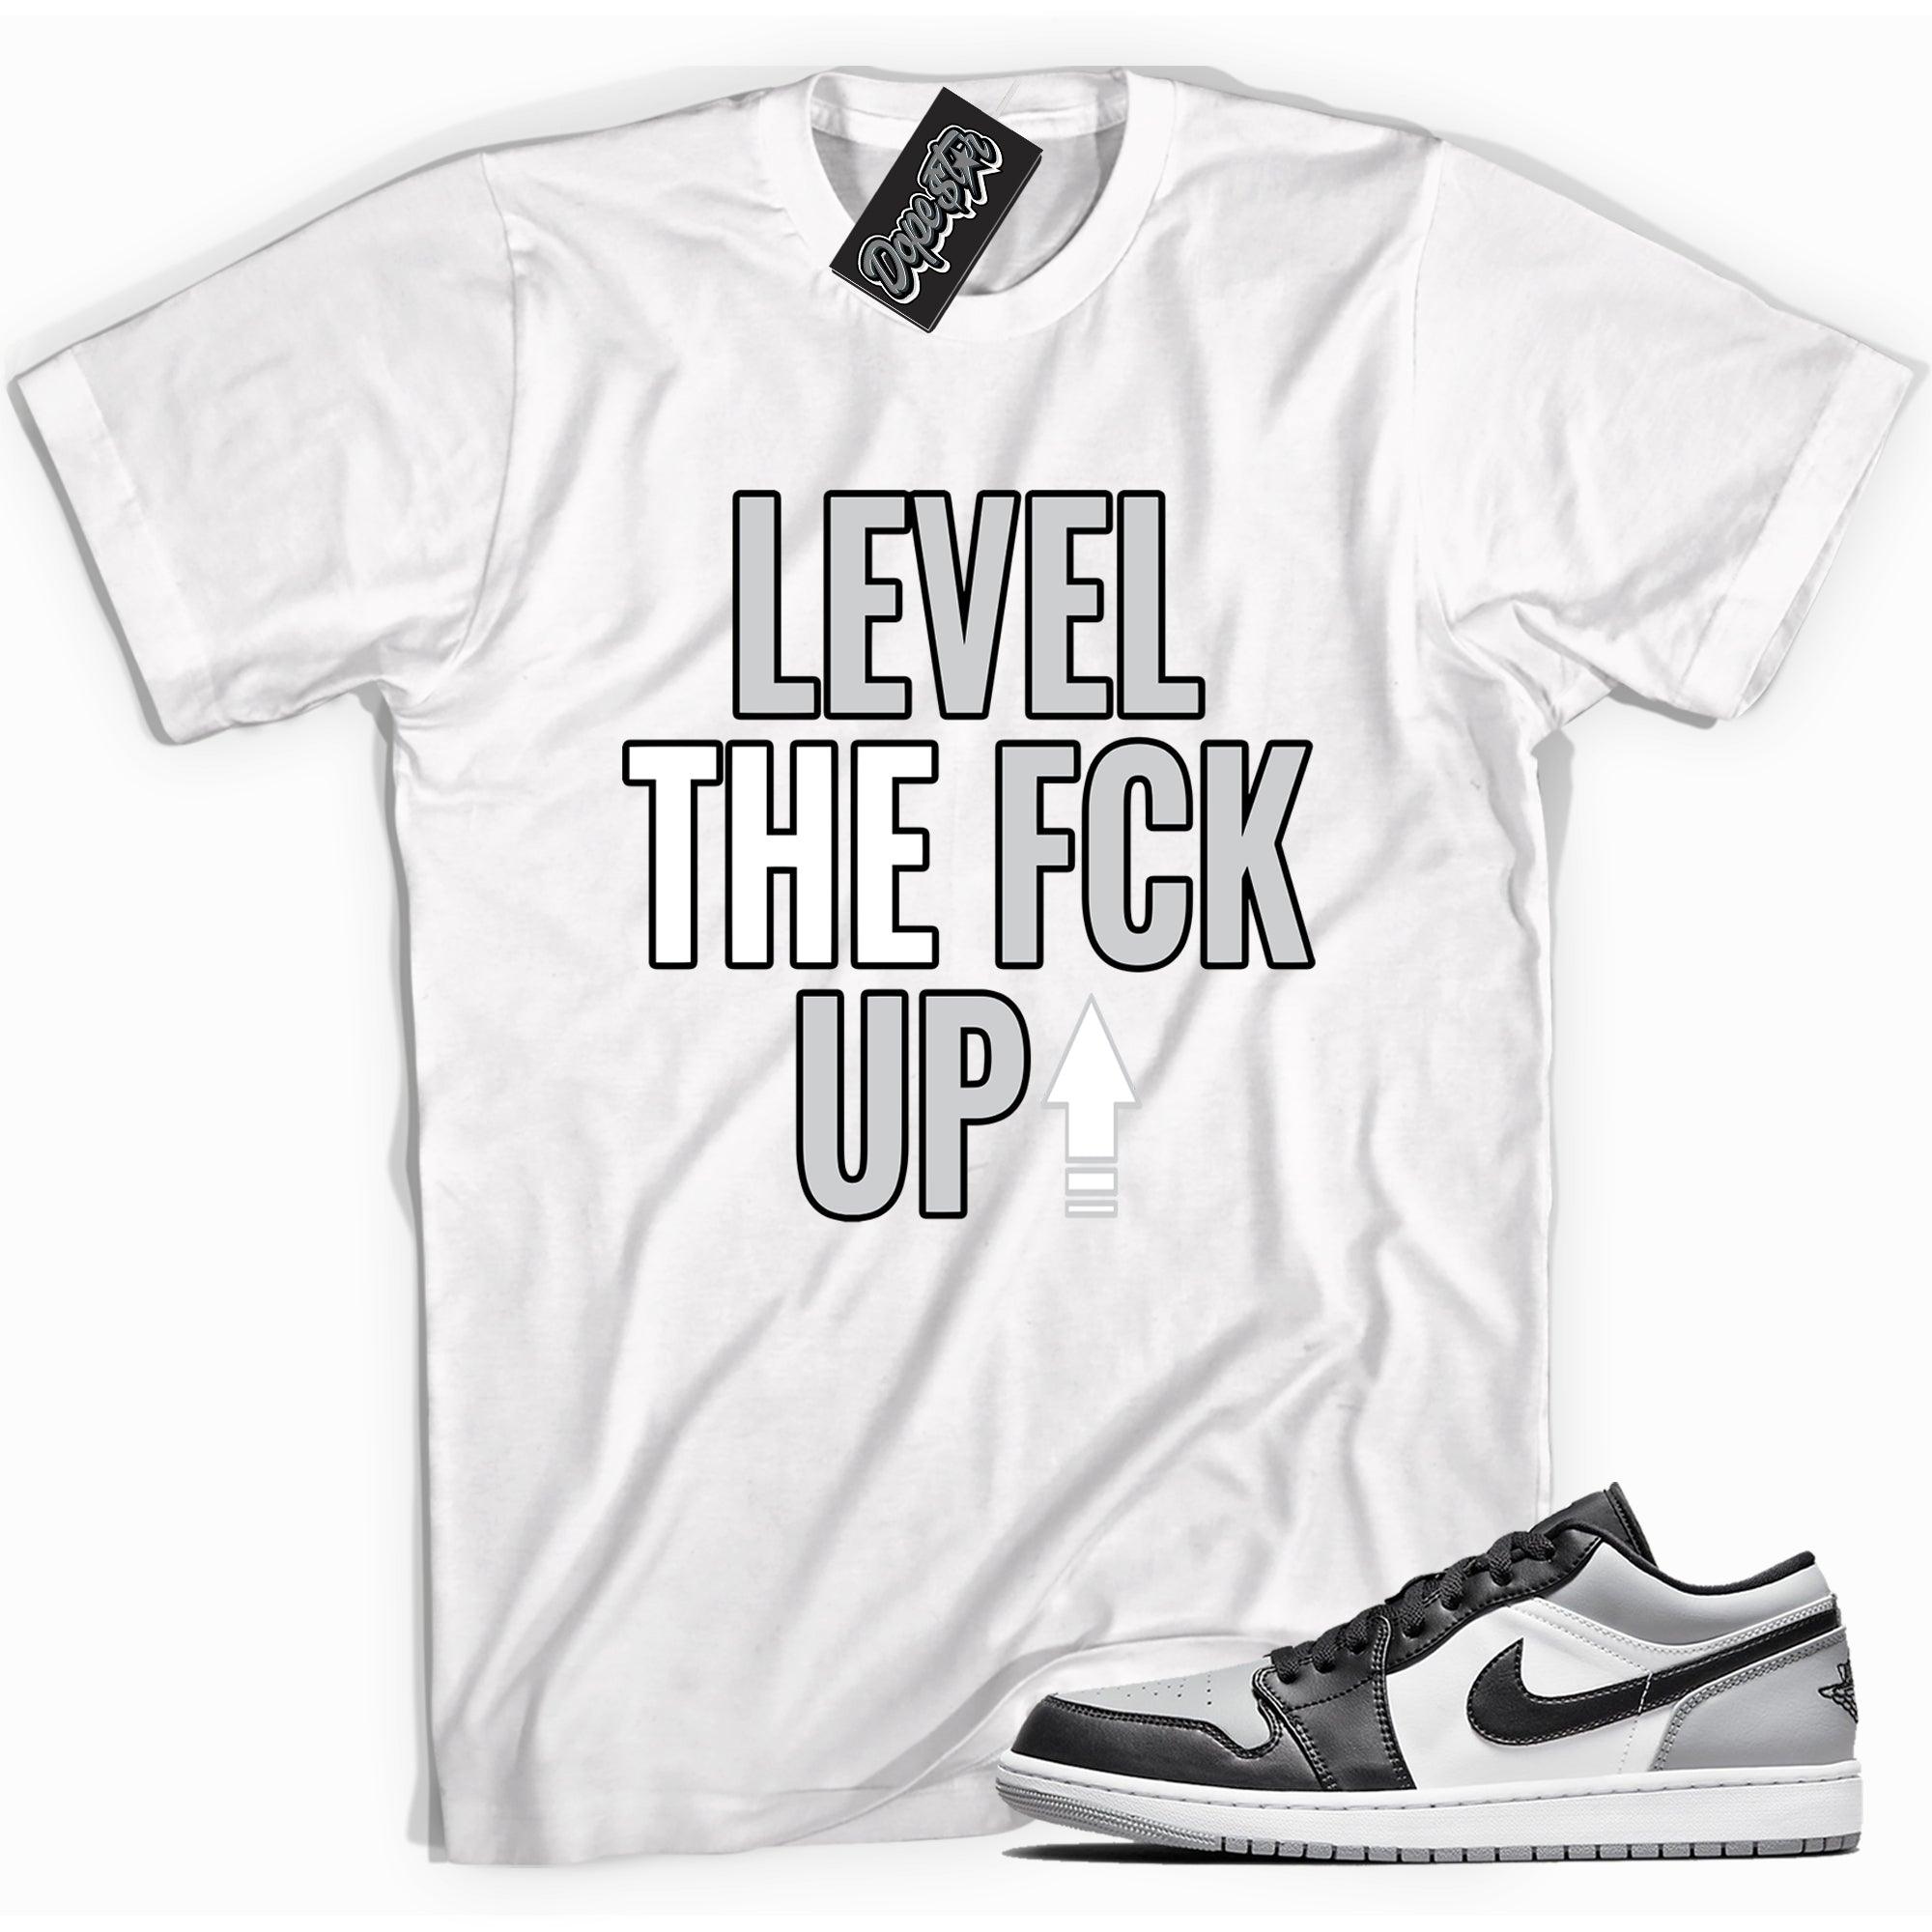 Cool white graphic tee with 'Level Up' print, that perfectly matches Air Jordan 1 Low Shadow Toe sneakers.